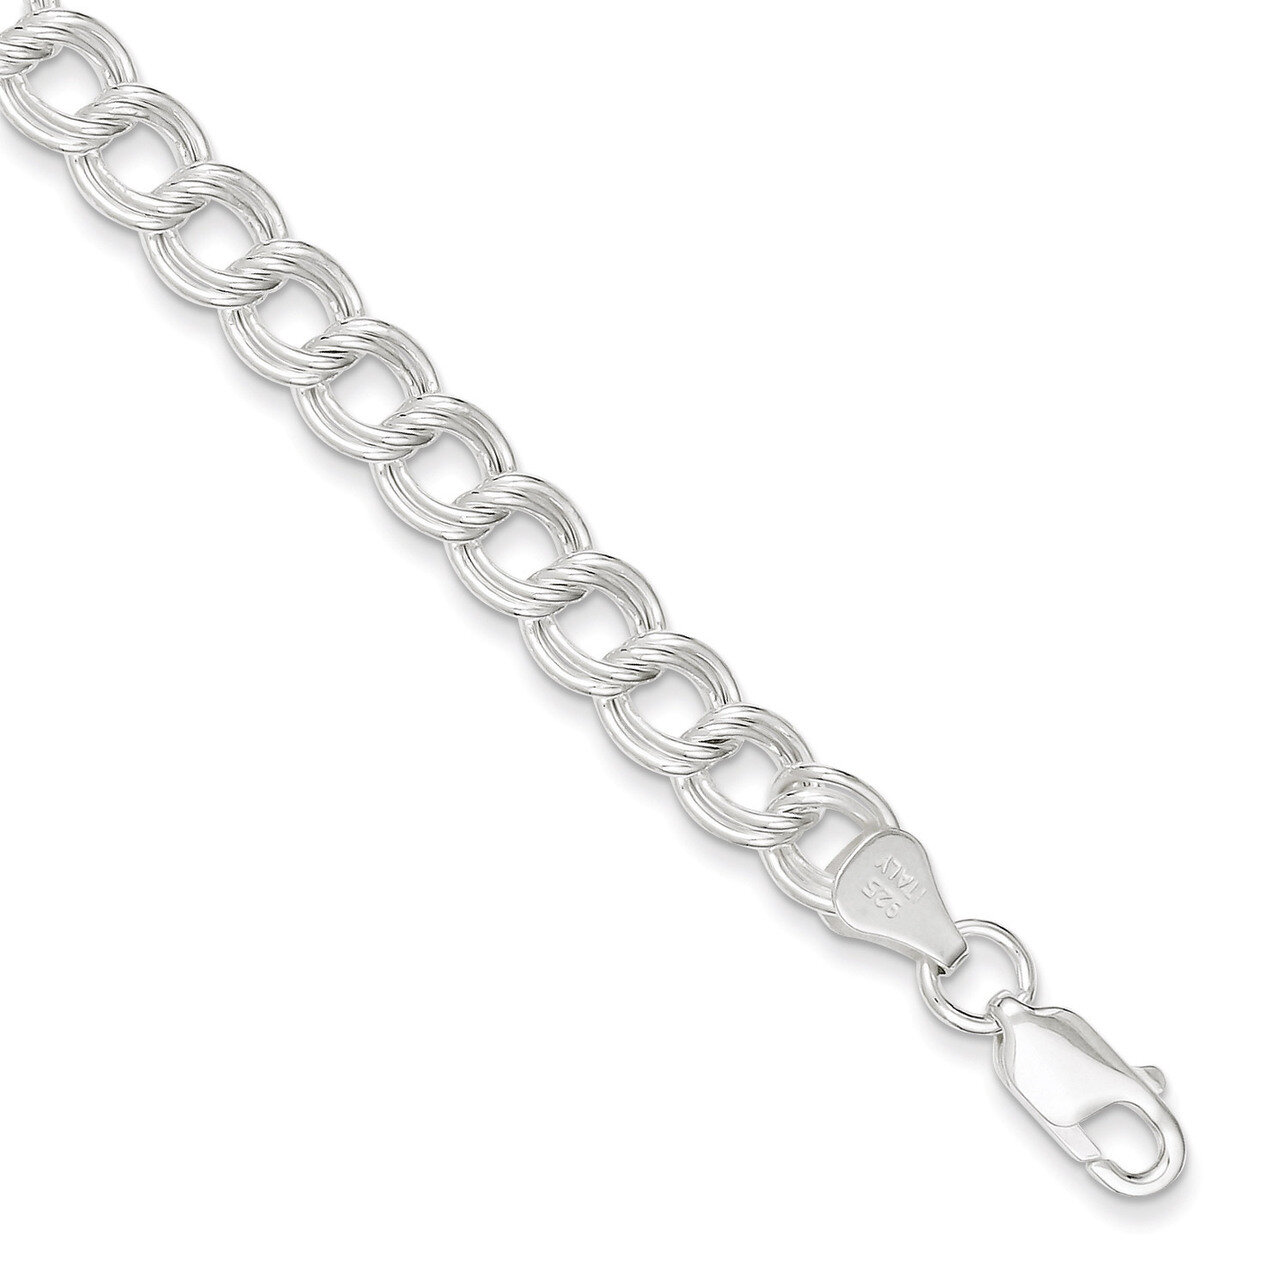 7 Inch Double Link Charm Bracelet Sterling Silver QCH100-7